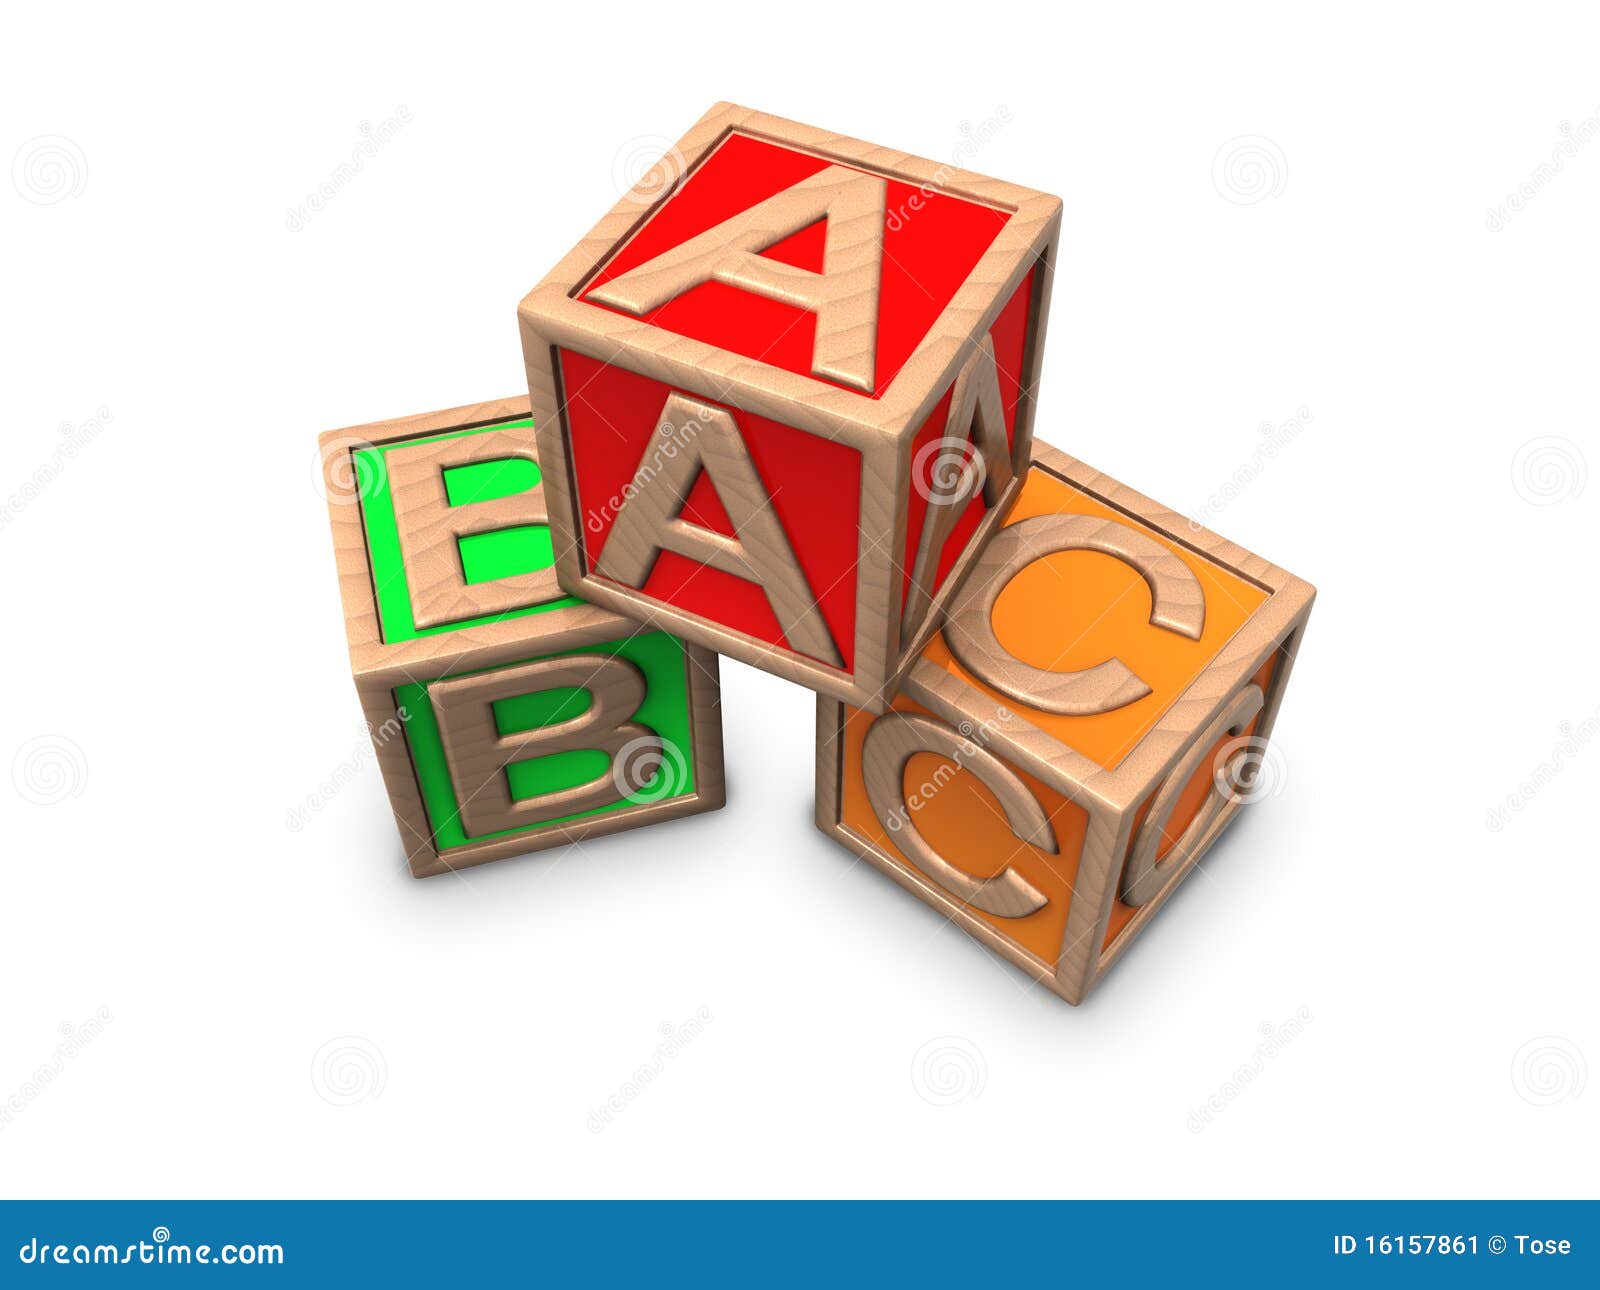 Wooden Blocks With Letters A B C Stock Image - Image: 16157861